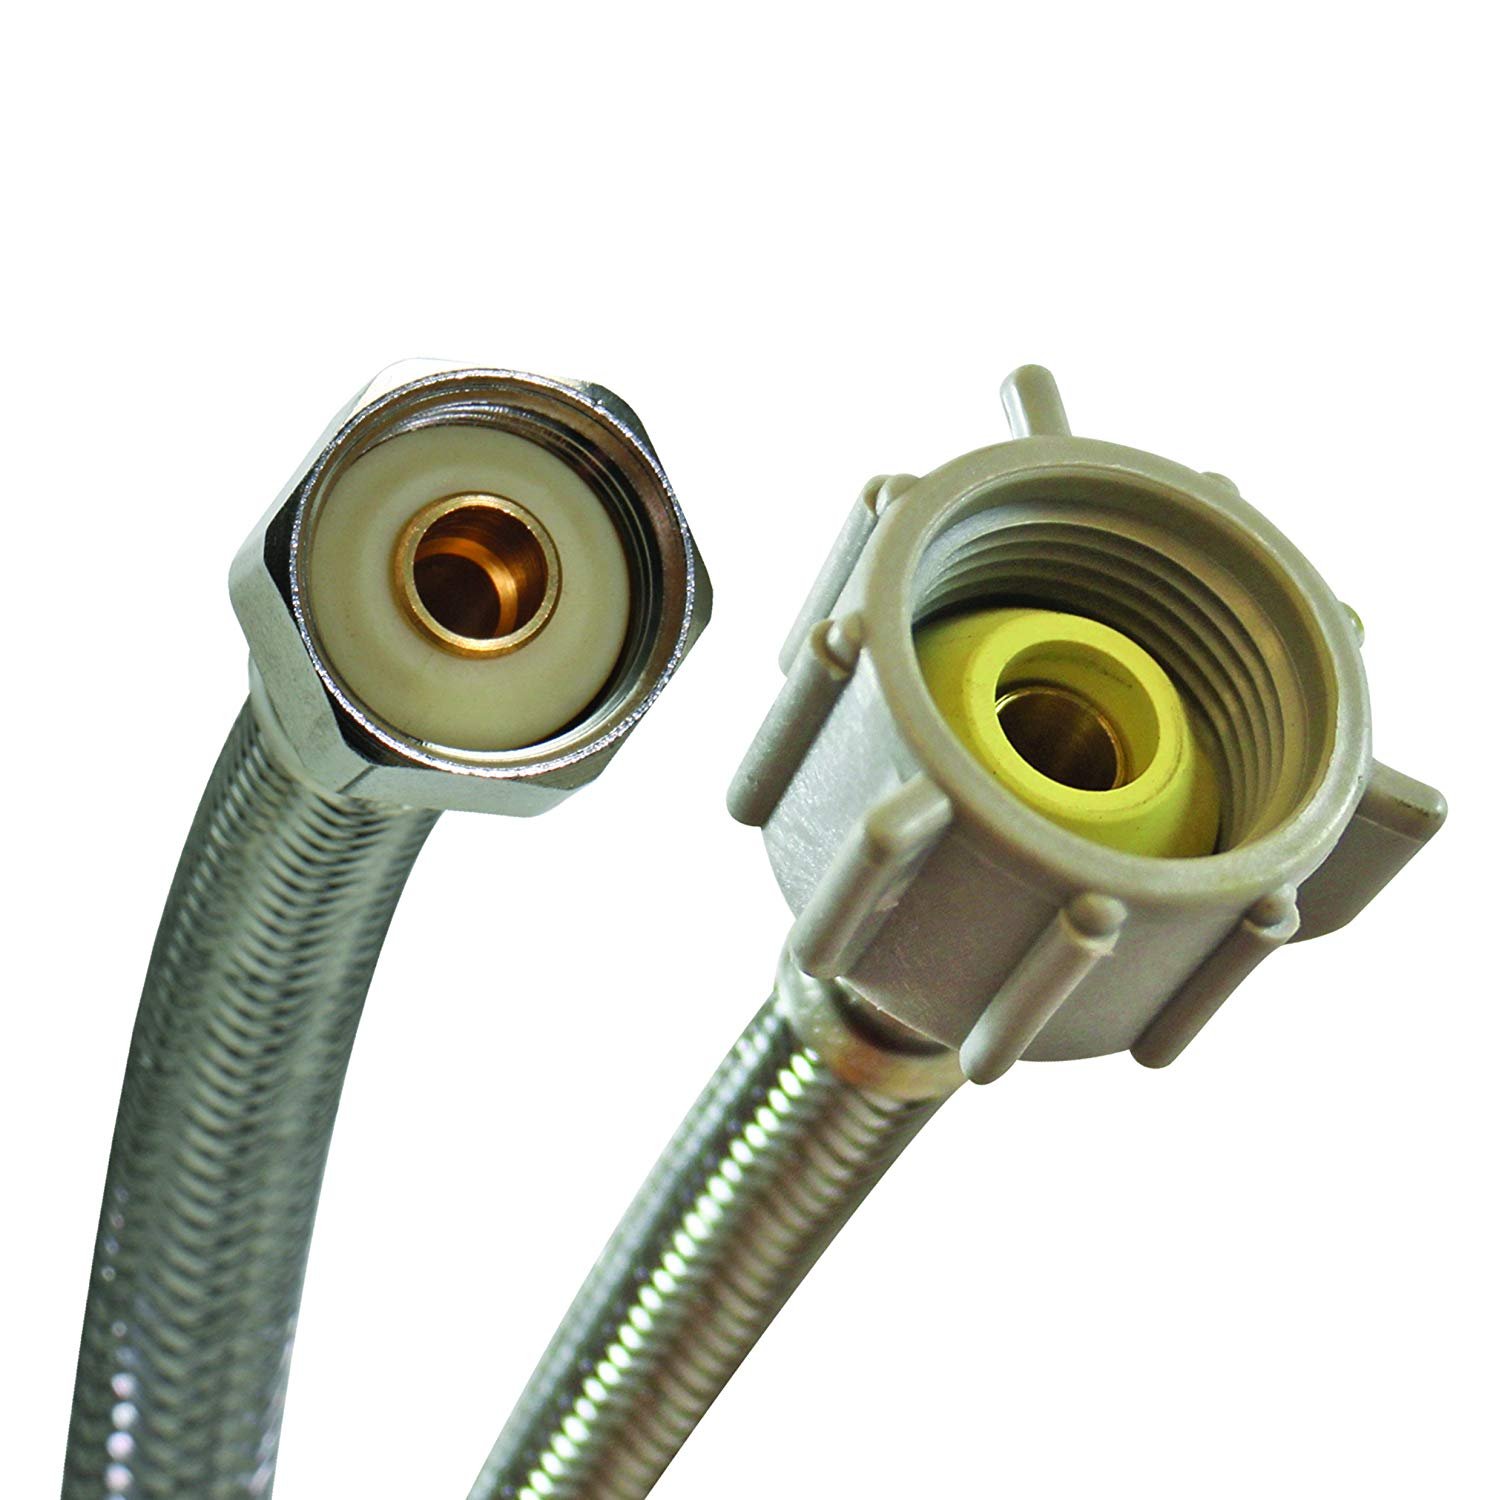 Fluidmaster B4T09U Universal Toilet Connector With Size Adaptors, Braided  Stainless Steel 3/8 Compression, 7/16 Compression, 1/2 Compression Or 1/2  Thread x 1/2 Female Ballcock Thread, 9-Inch